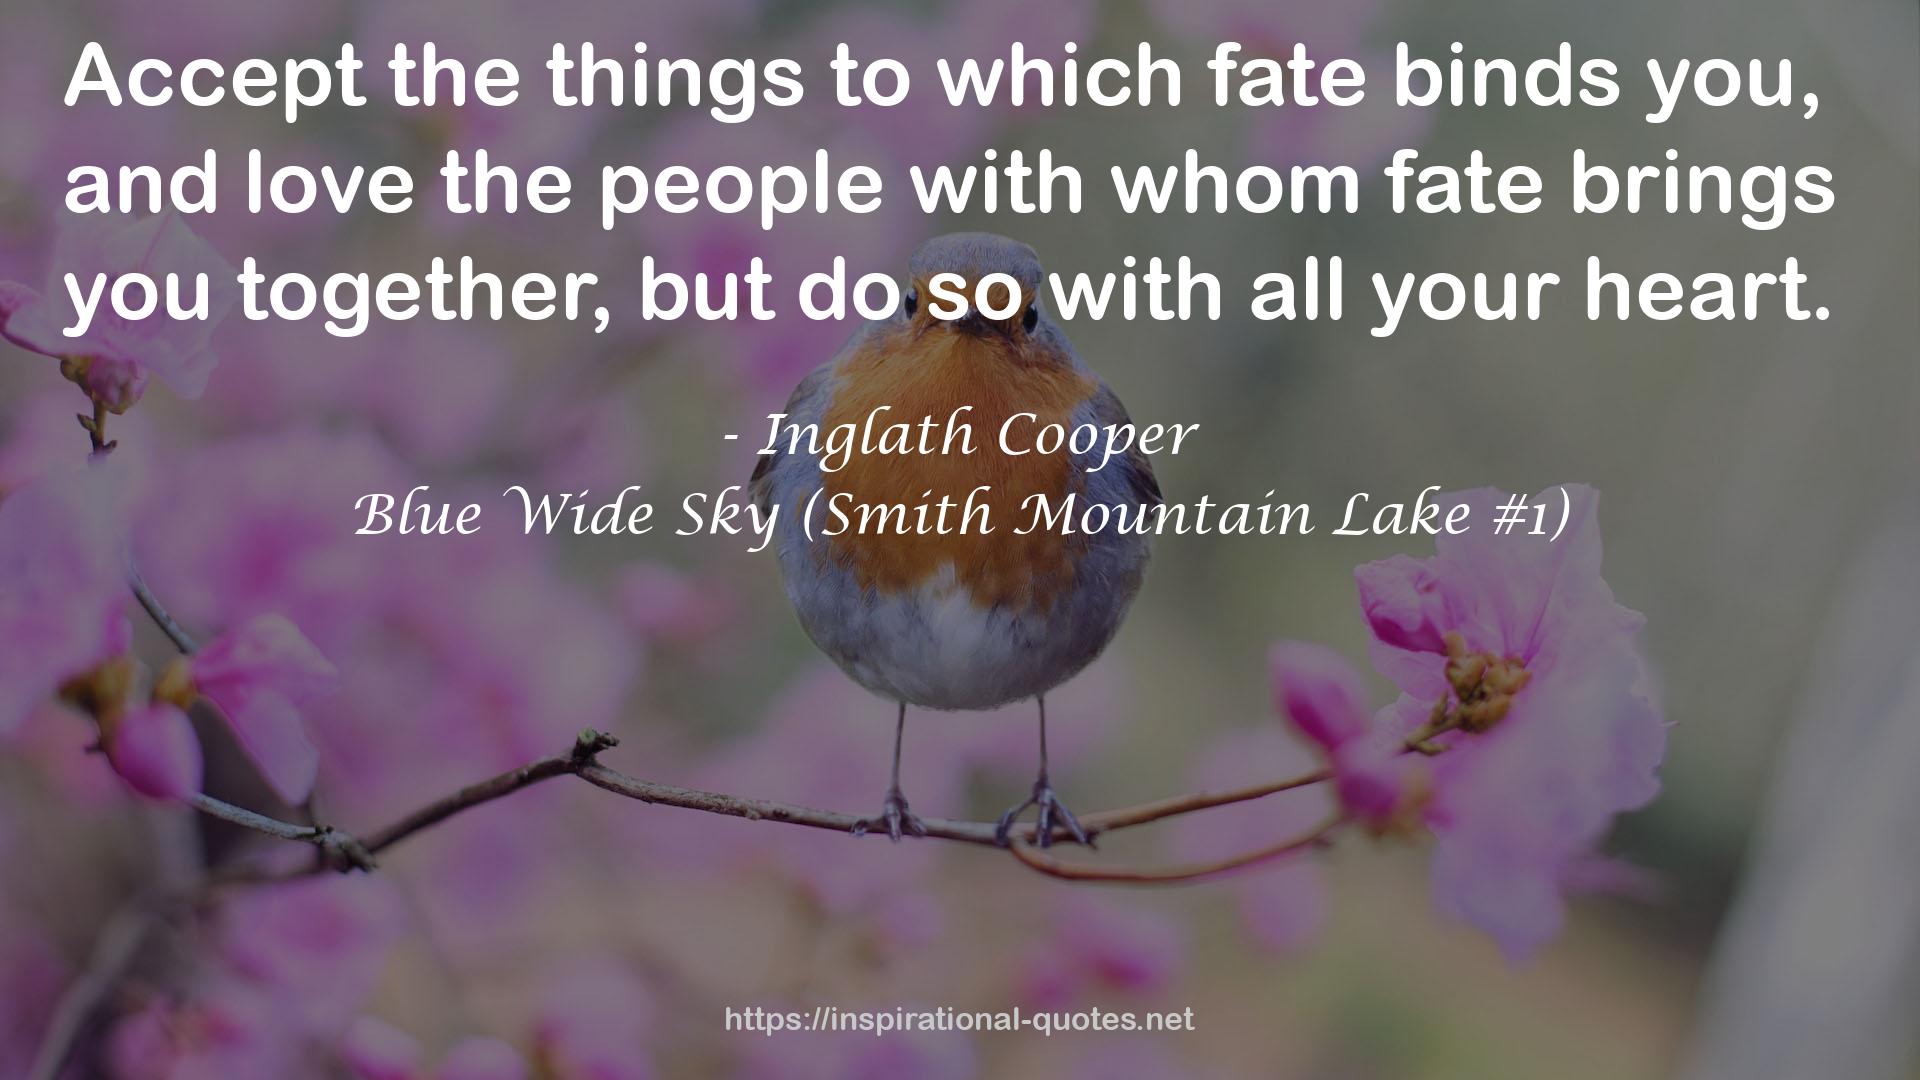 Blue Wide Sky (Smith Mountain Lake #1) QUOTES